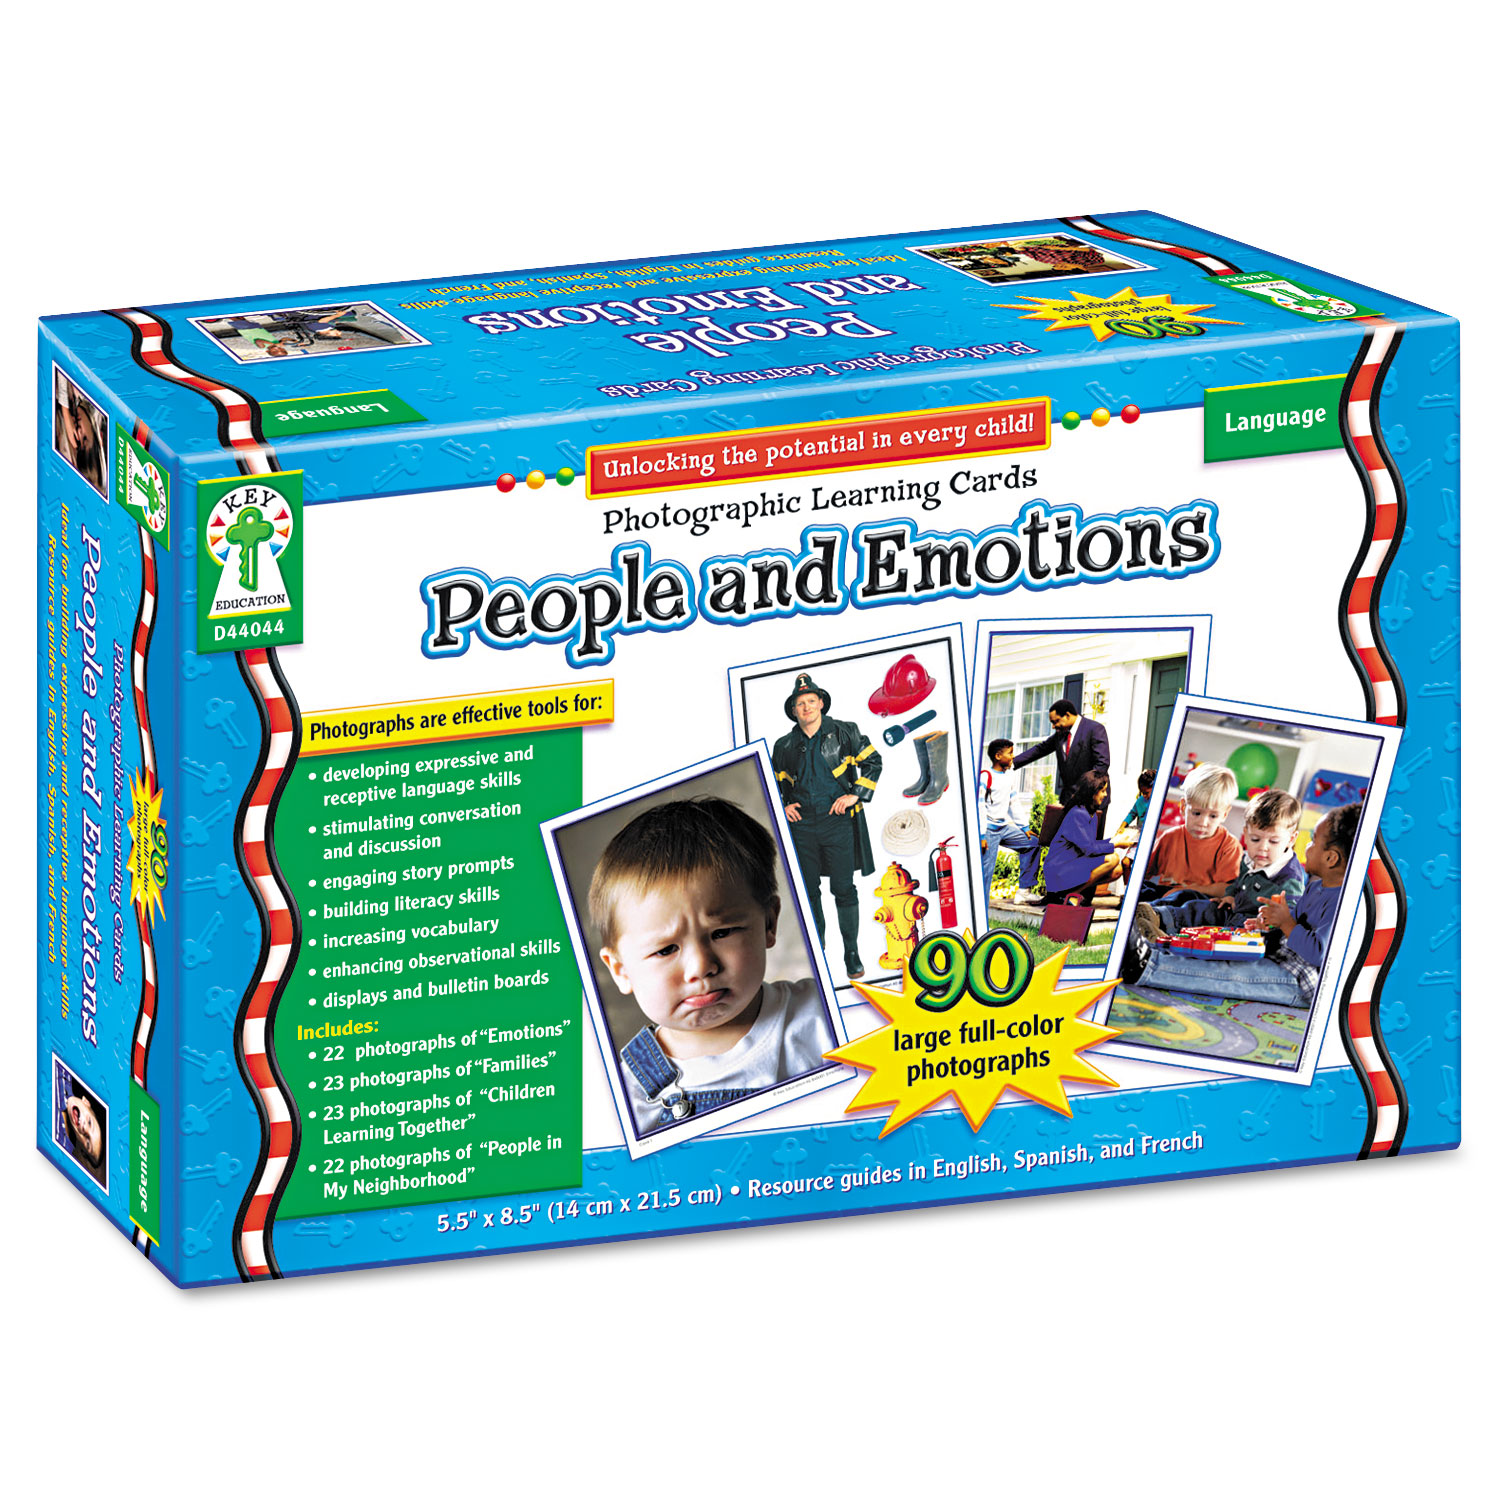 Photographic Learning Cards Boxed Set, People and Emotions, Grades K-12